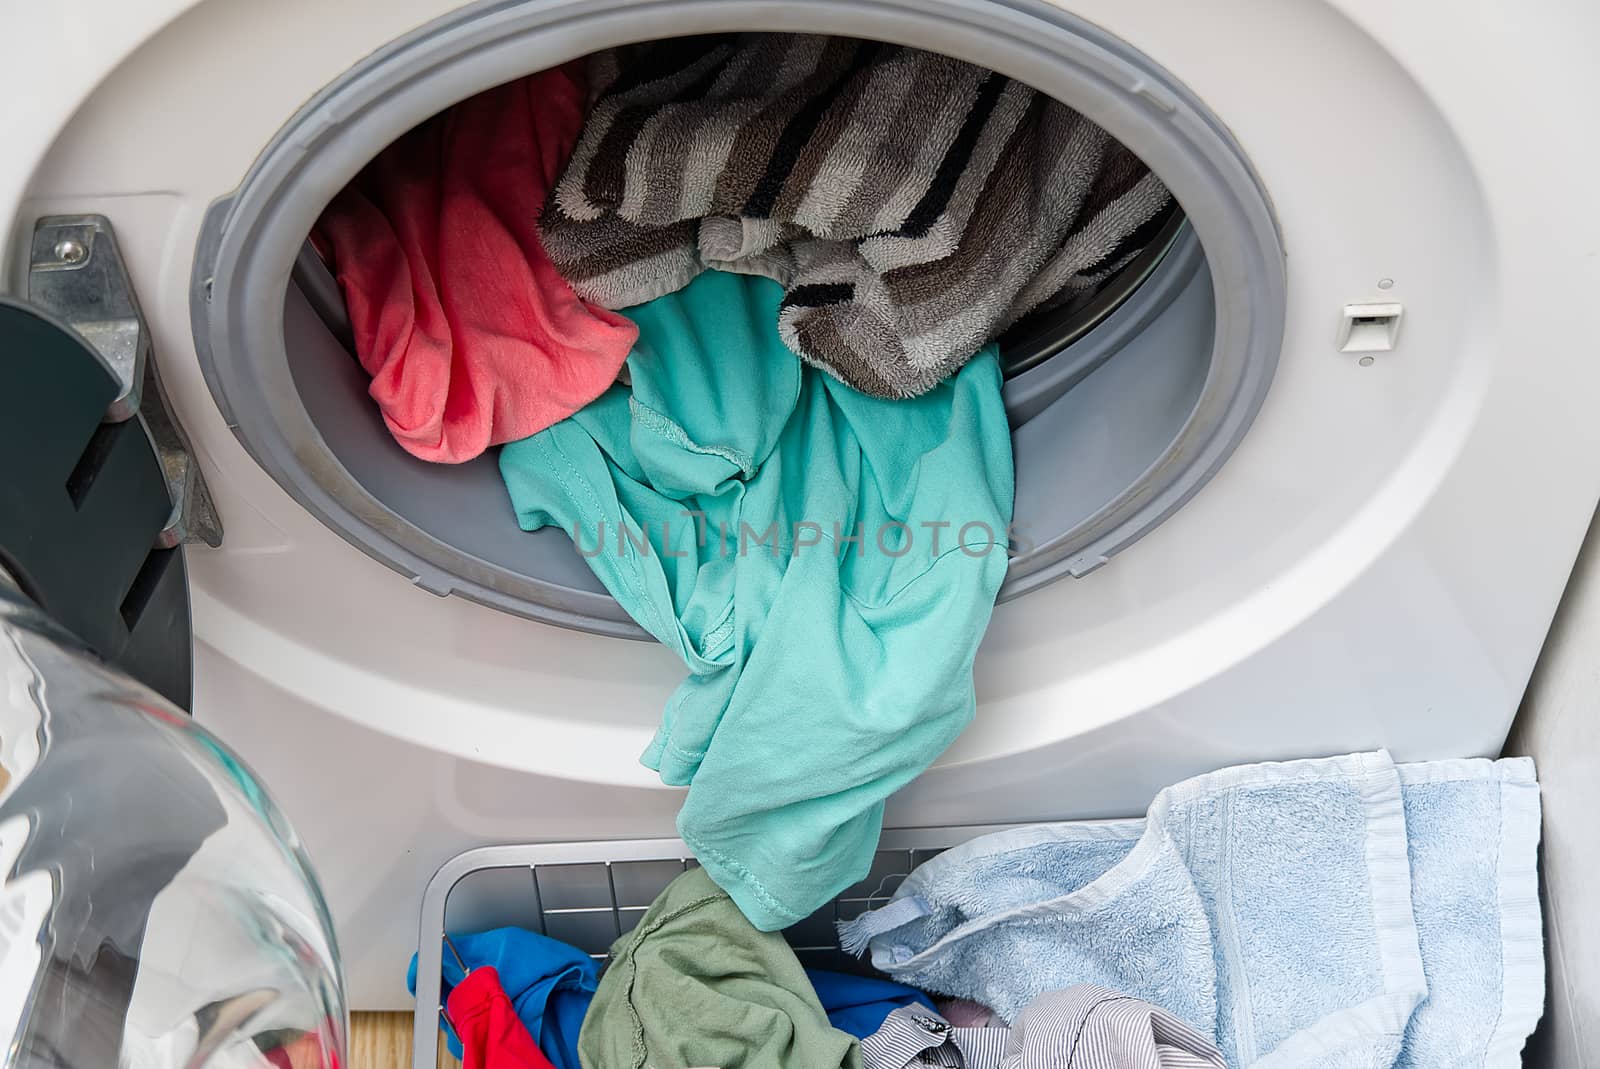 white front-loading washing machine, full of clothes. cleaning laundry. dirty laundry in the washing machine